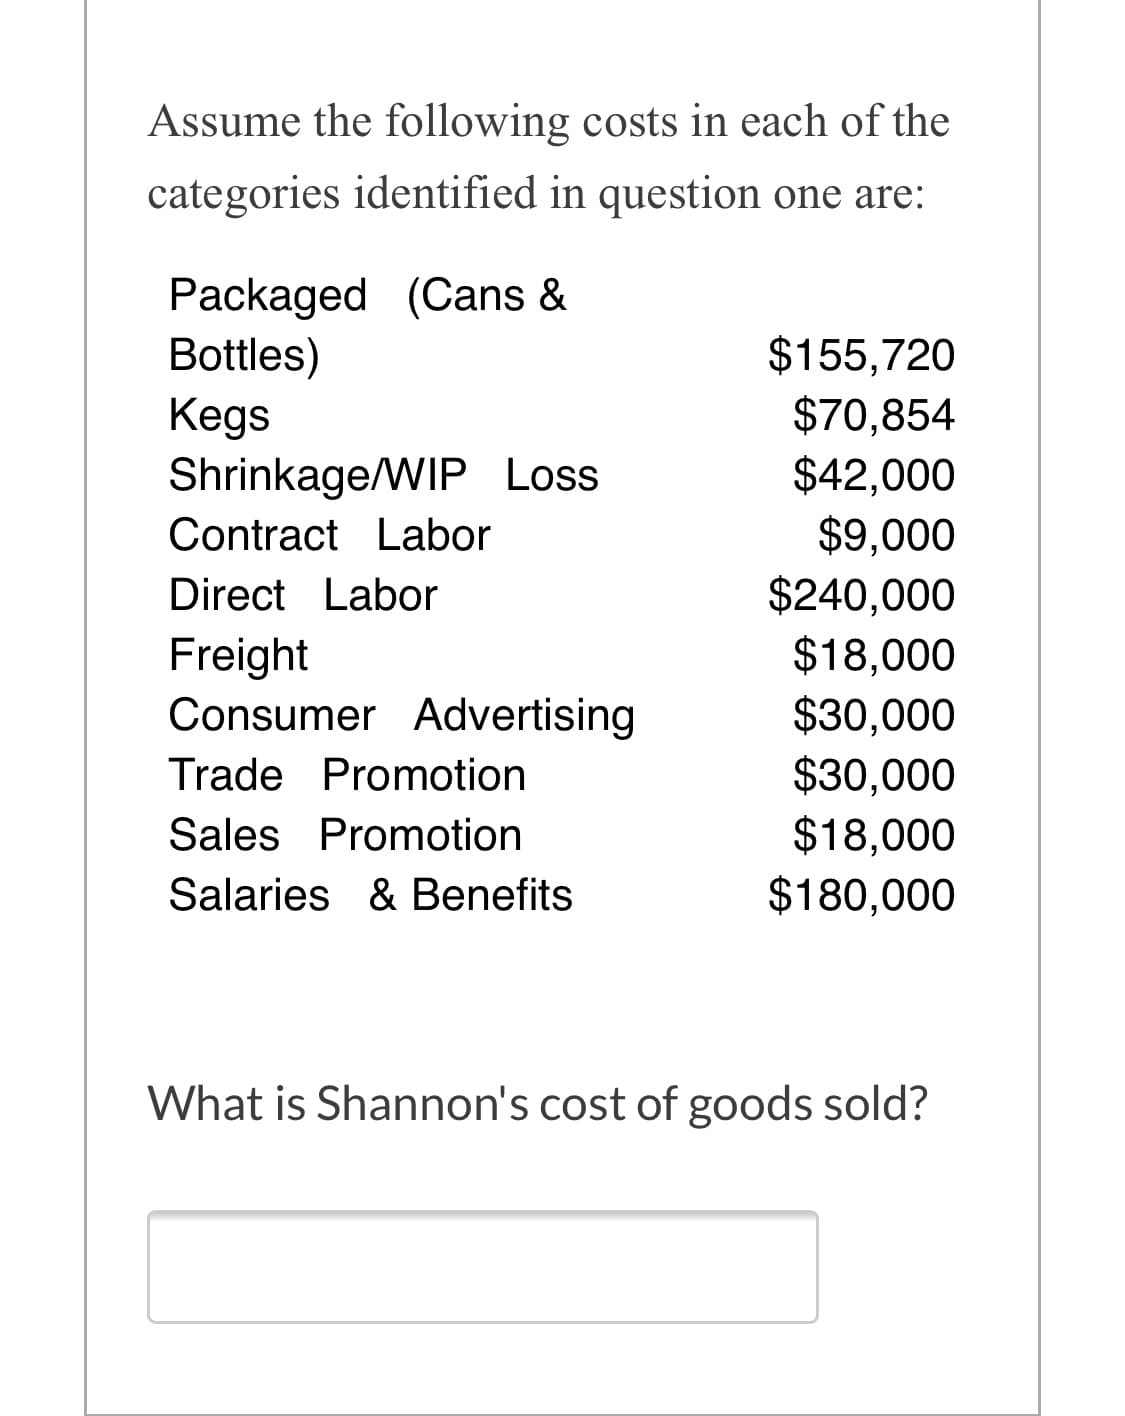 Assume the following costs in each of the
categories identified in question one are:
Packaged (Cans &
Bottles)
Kegs
Shrinkage/WIP Loss
$155,720
$70,854
$42,000
$9,000
$240,000
$18,000
Contract Labor
Direct Labor
Freight
Consumer Advertising
$30,000
$30,000
$18,000
$180,000
Trade Promotion
Sales Promotion
Salaries & Benefits
What is Shannon's cost of goods sold?
